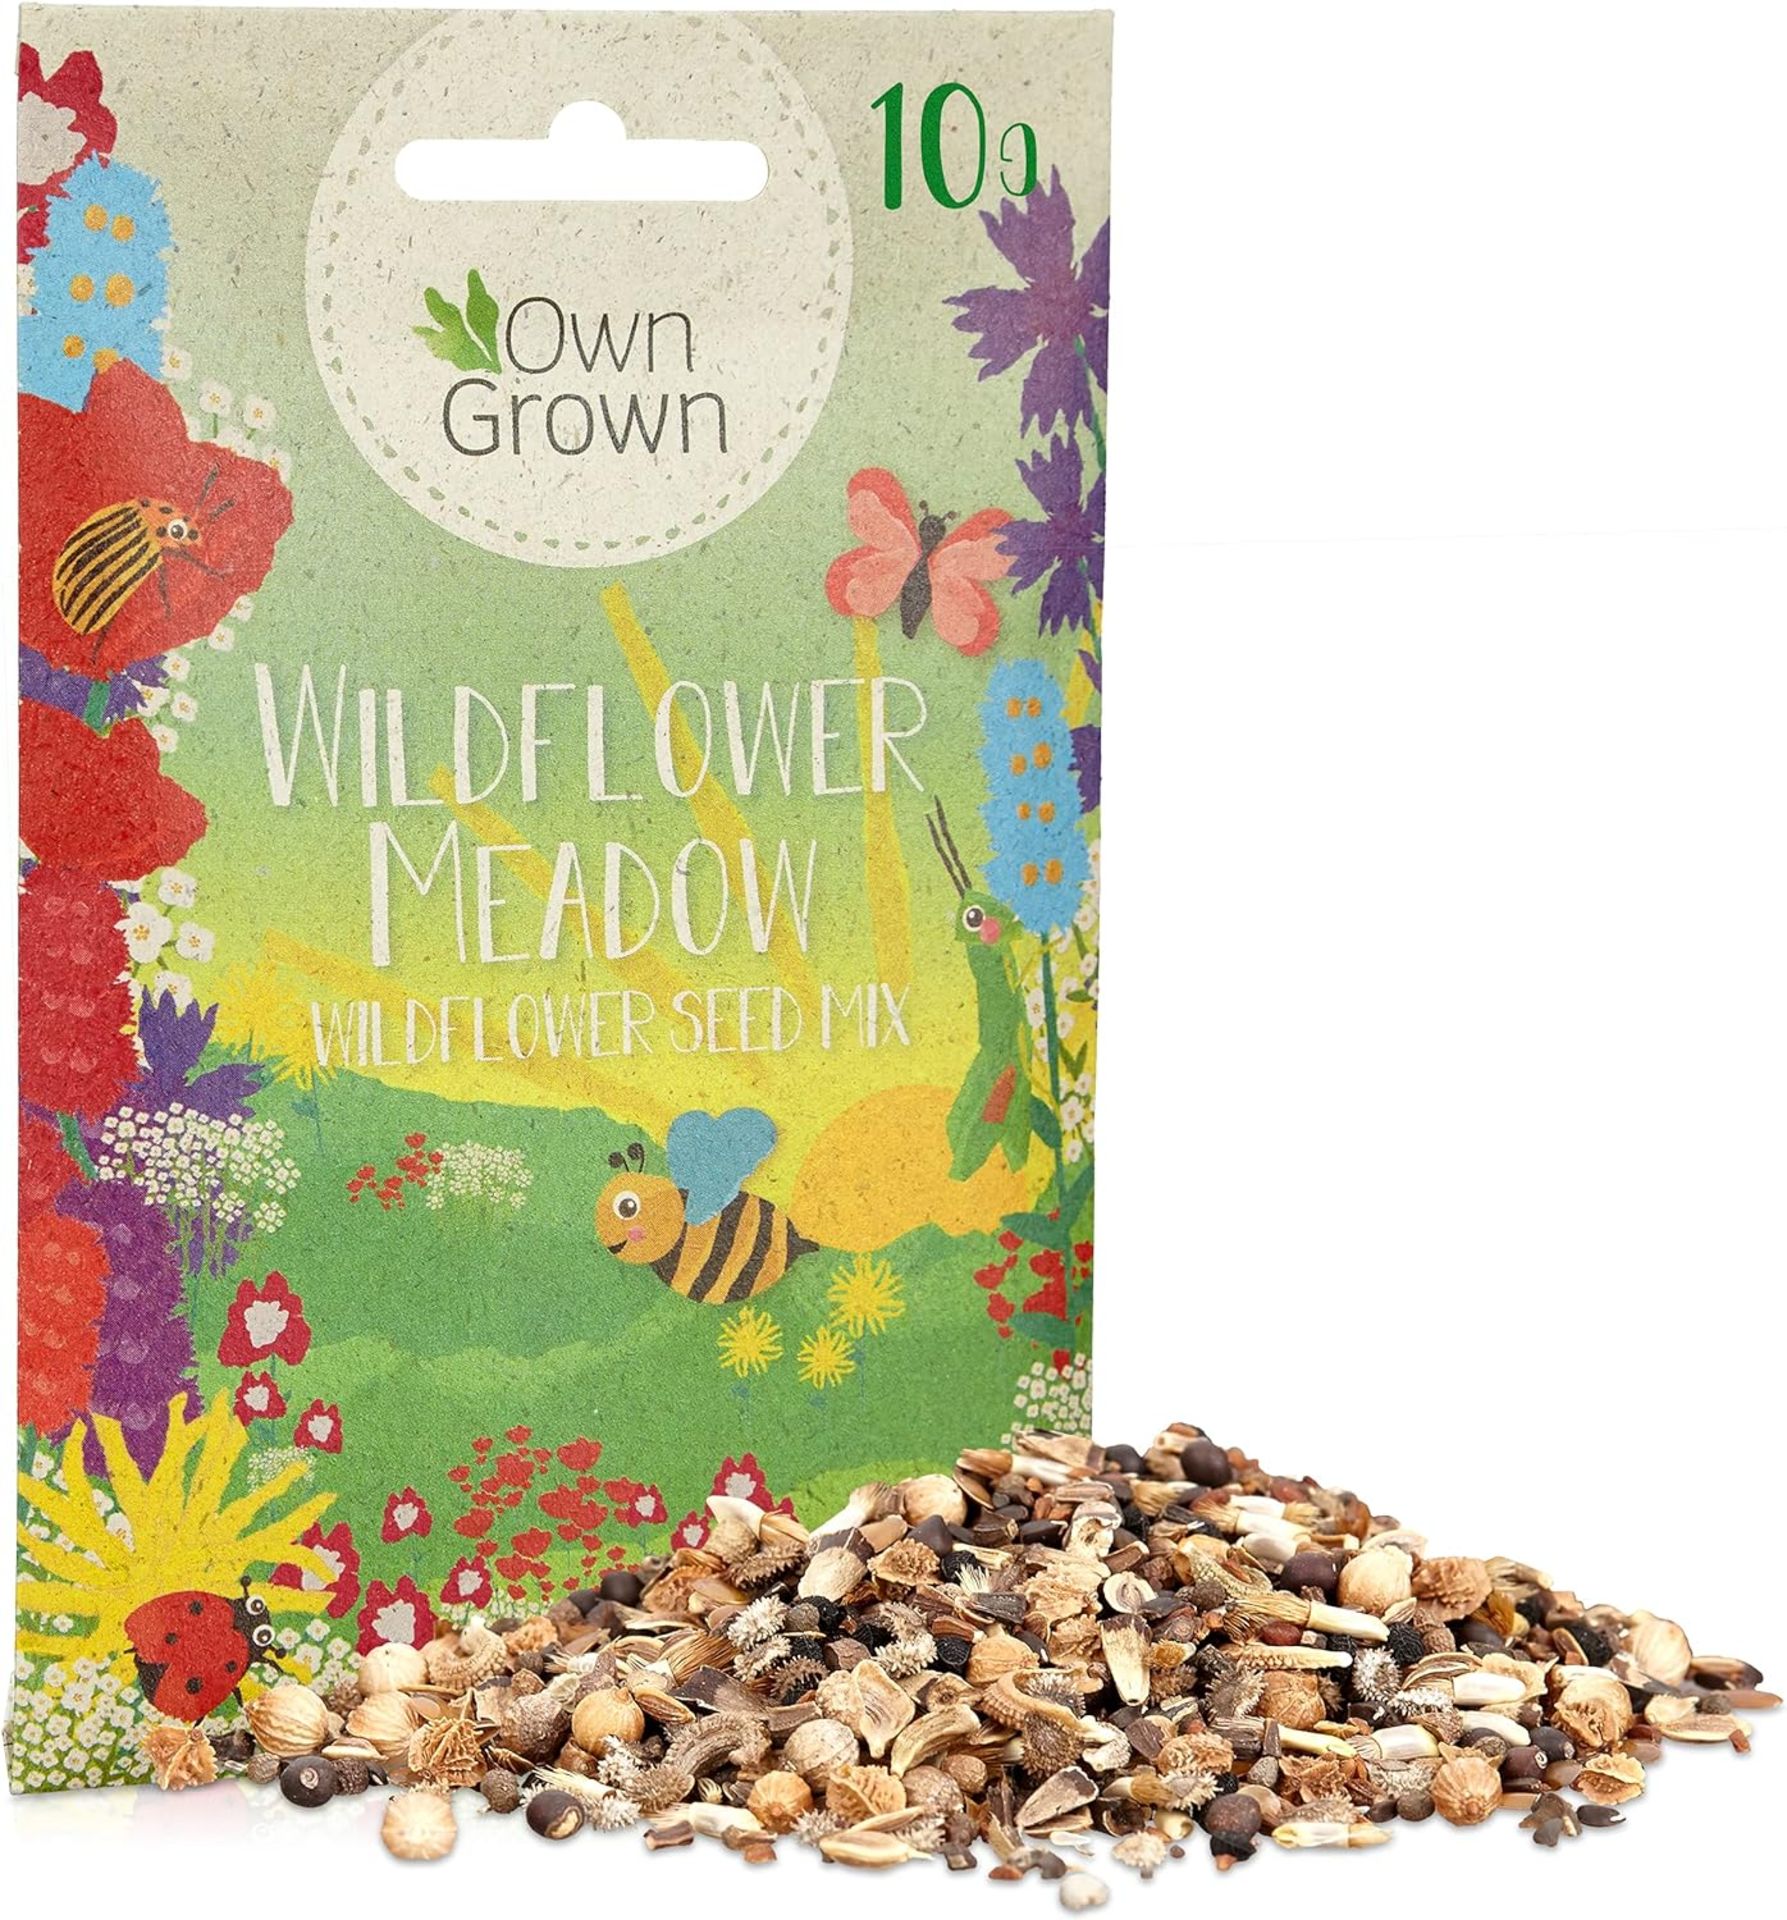 Set of 10 x Wildflower Meadow: 10g Premium Wildflower Seed Mix for Planting - Idyllic Bee and